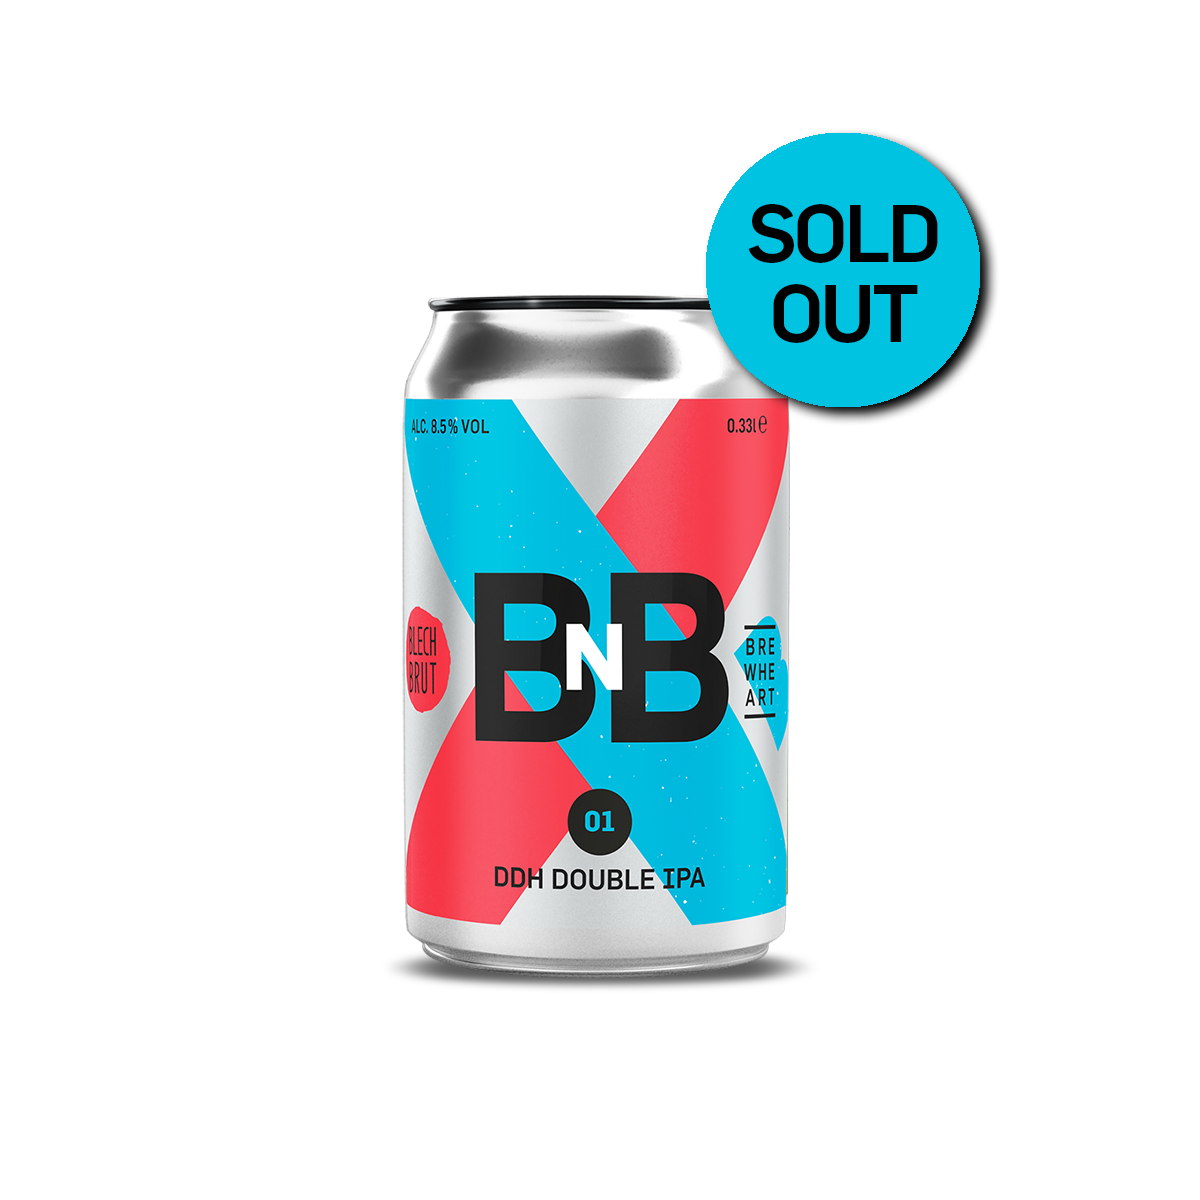 LIMITED COLLAB | B'n'B - DDH Double IPA - w/ Blech.Brut